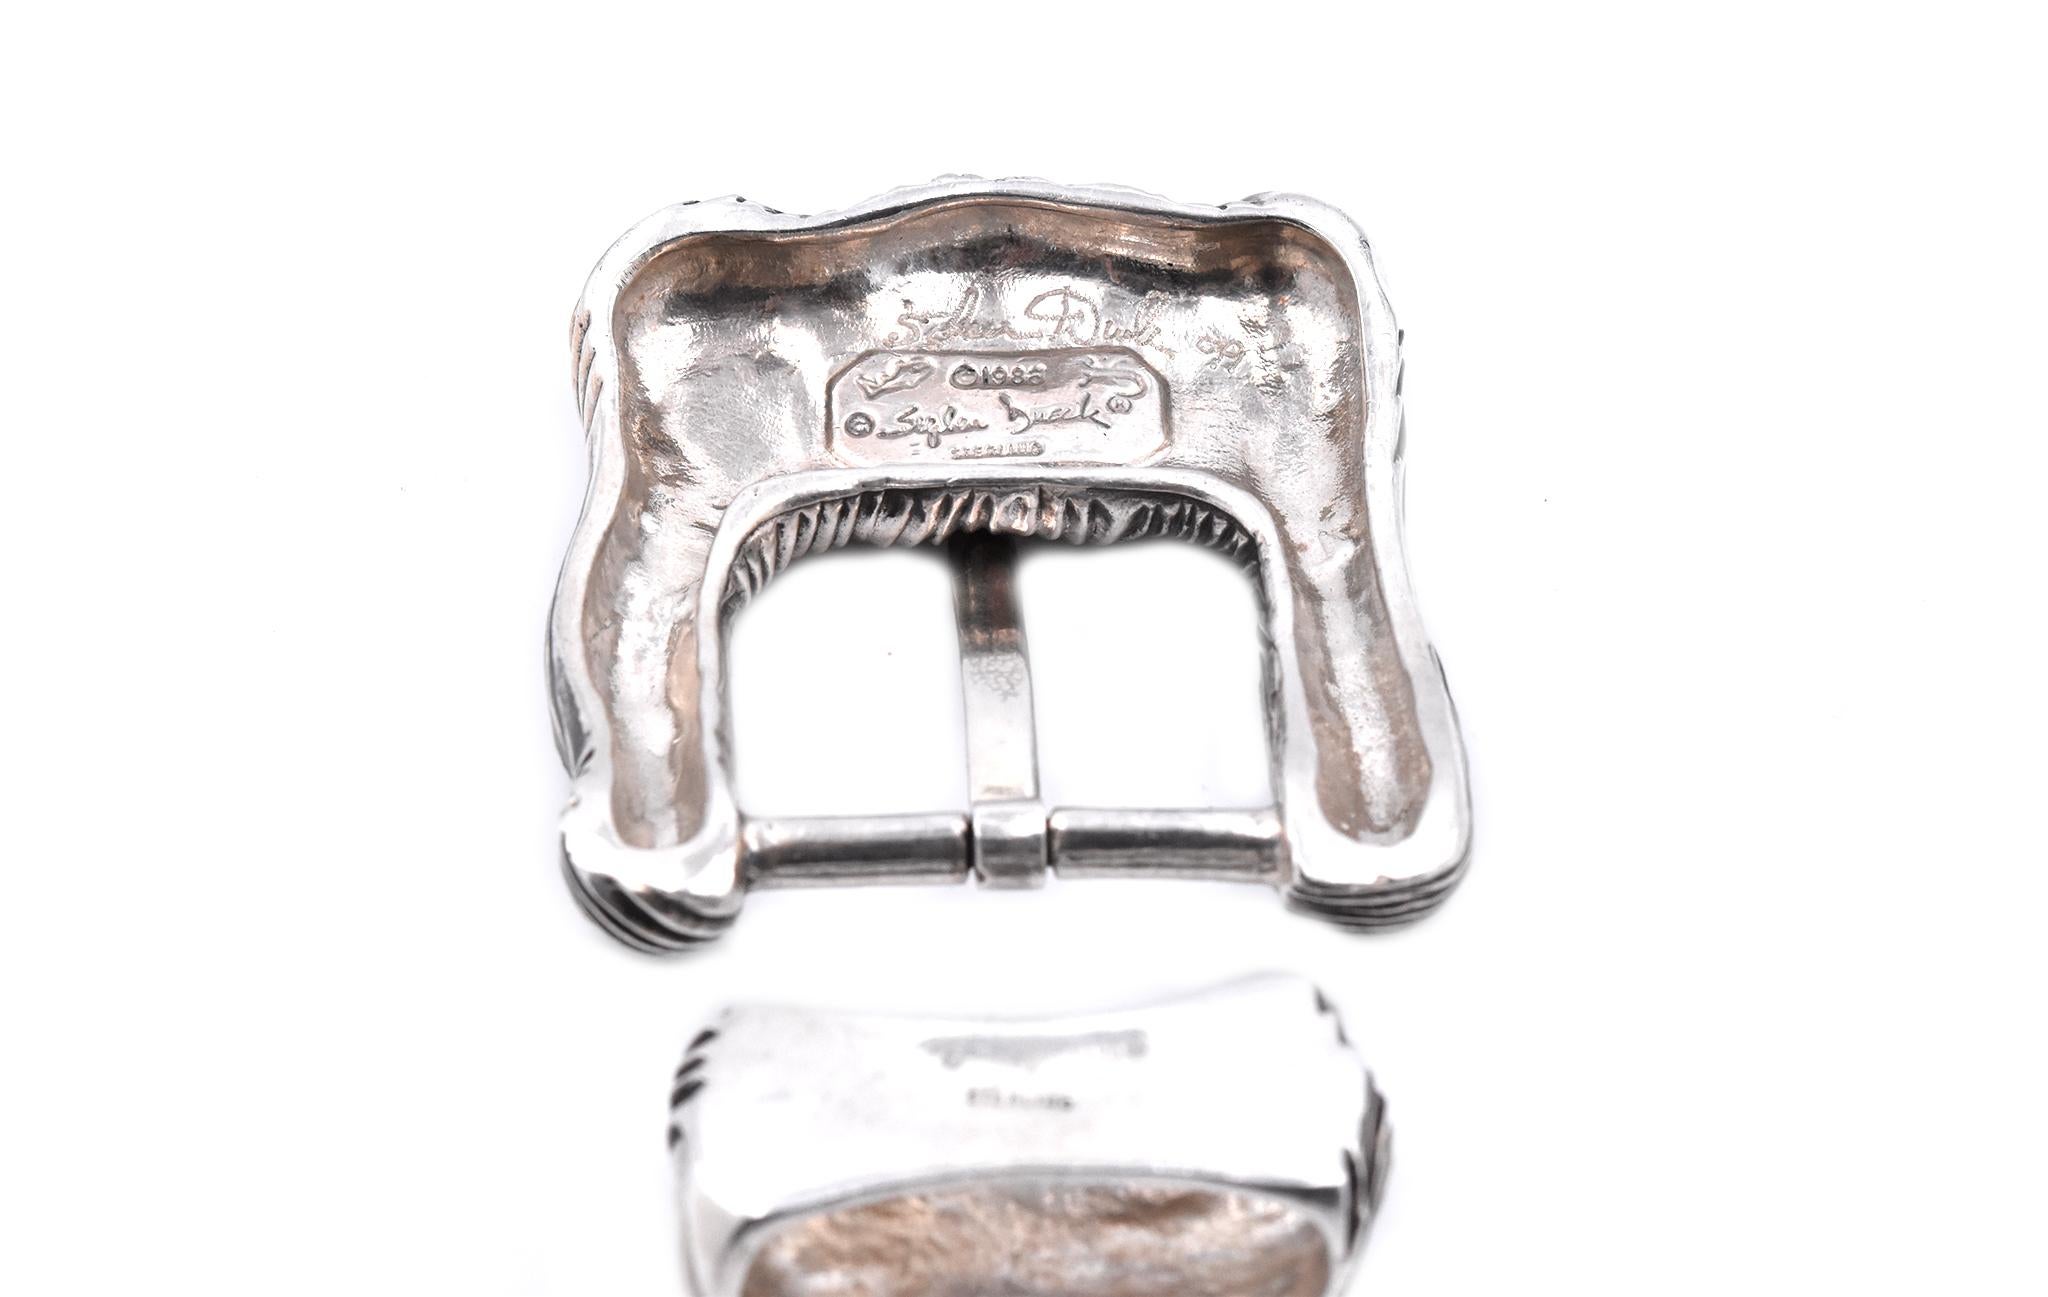 Designer: Stephen Dweck
Material: sterling silver
Dimensions: buckle measures 60mm x 54mm
Weight: 102.2 grams